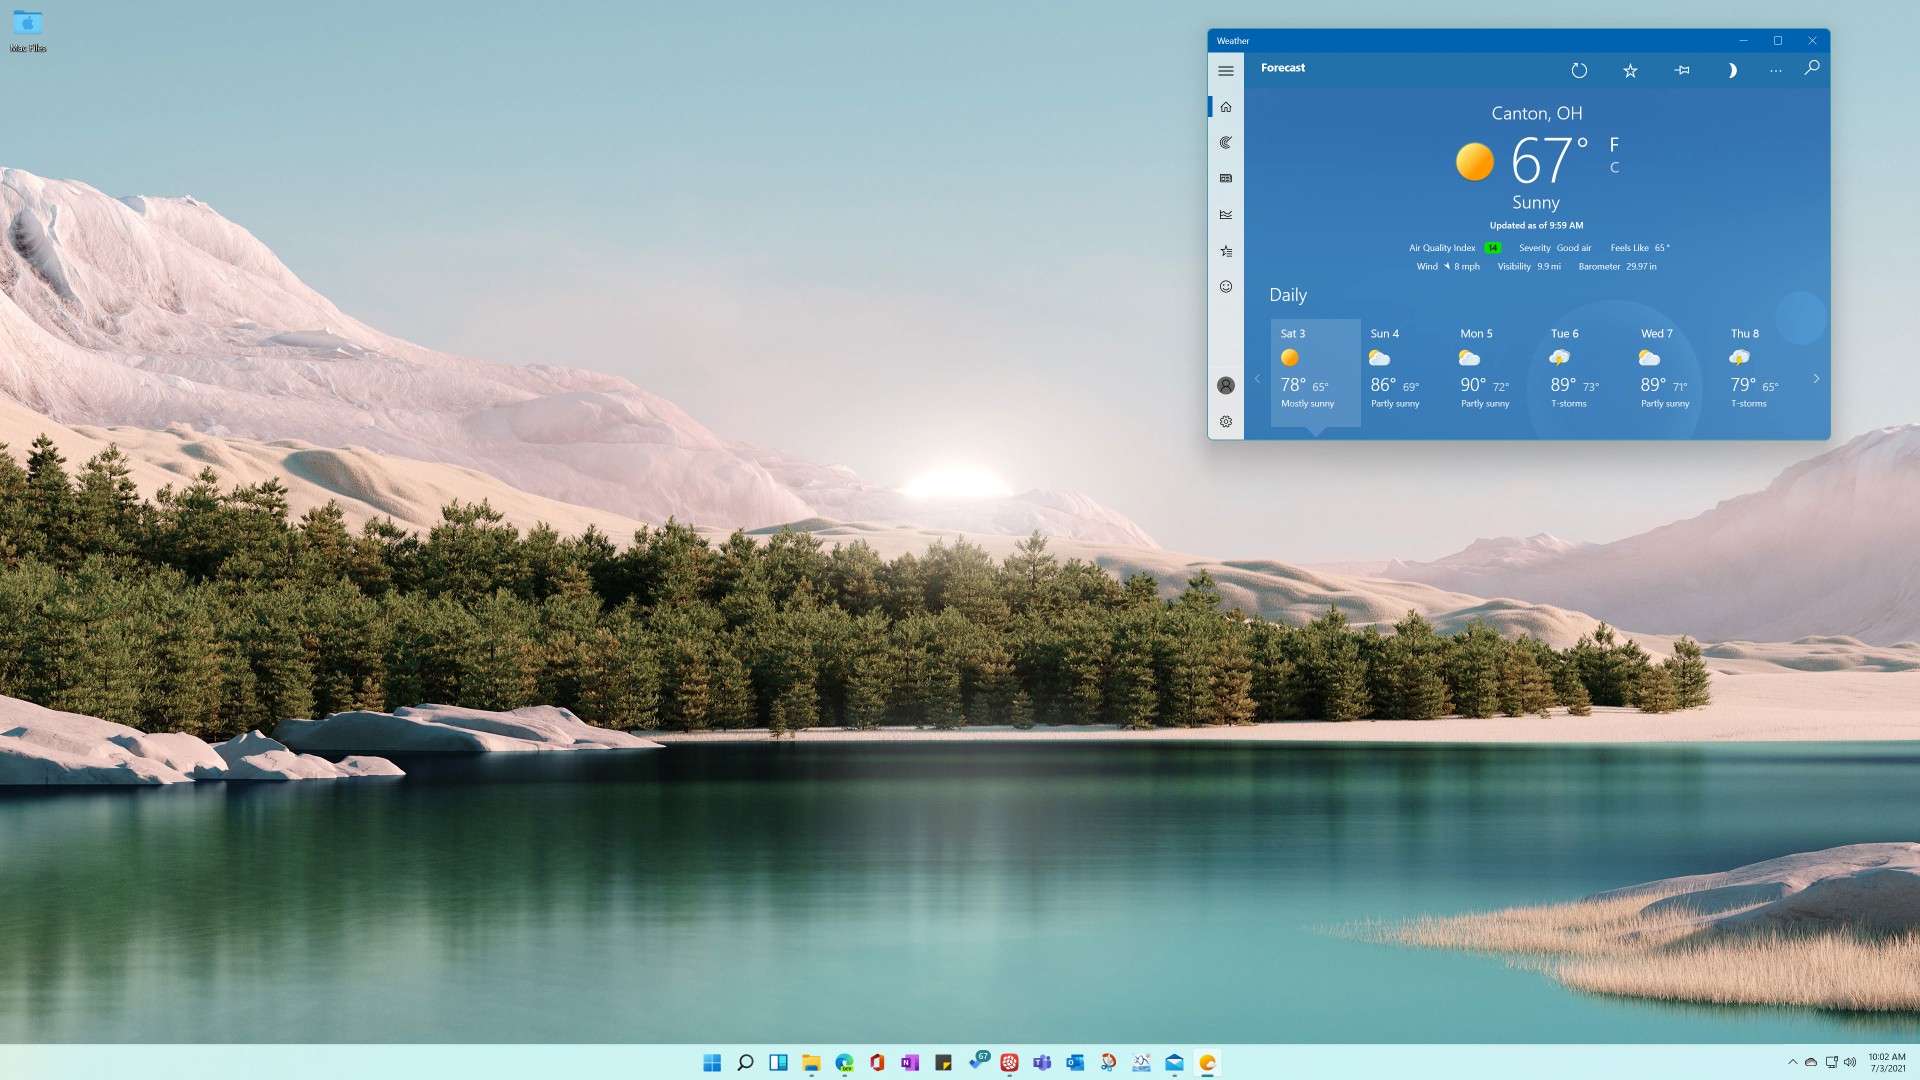 Meet The Linux Desktop That's More Beautiful Than Windows 10 And MacOS